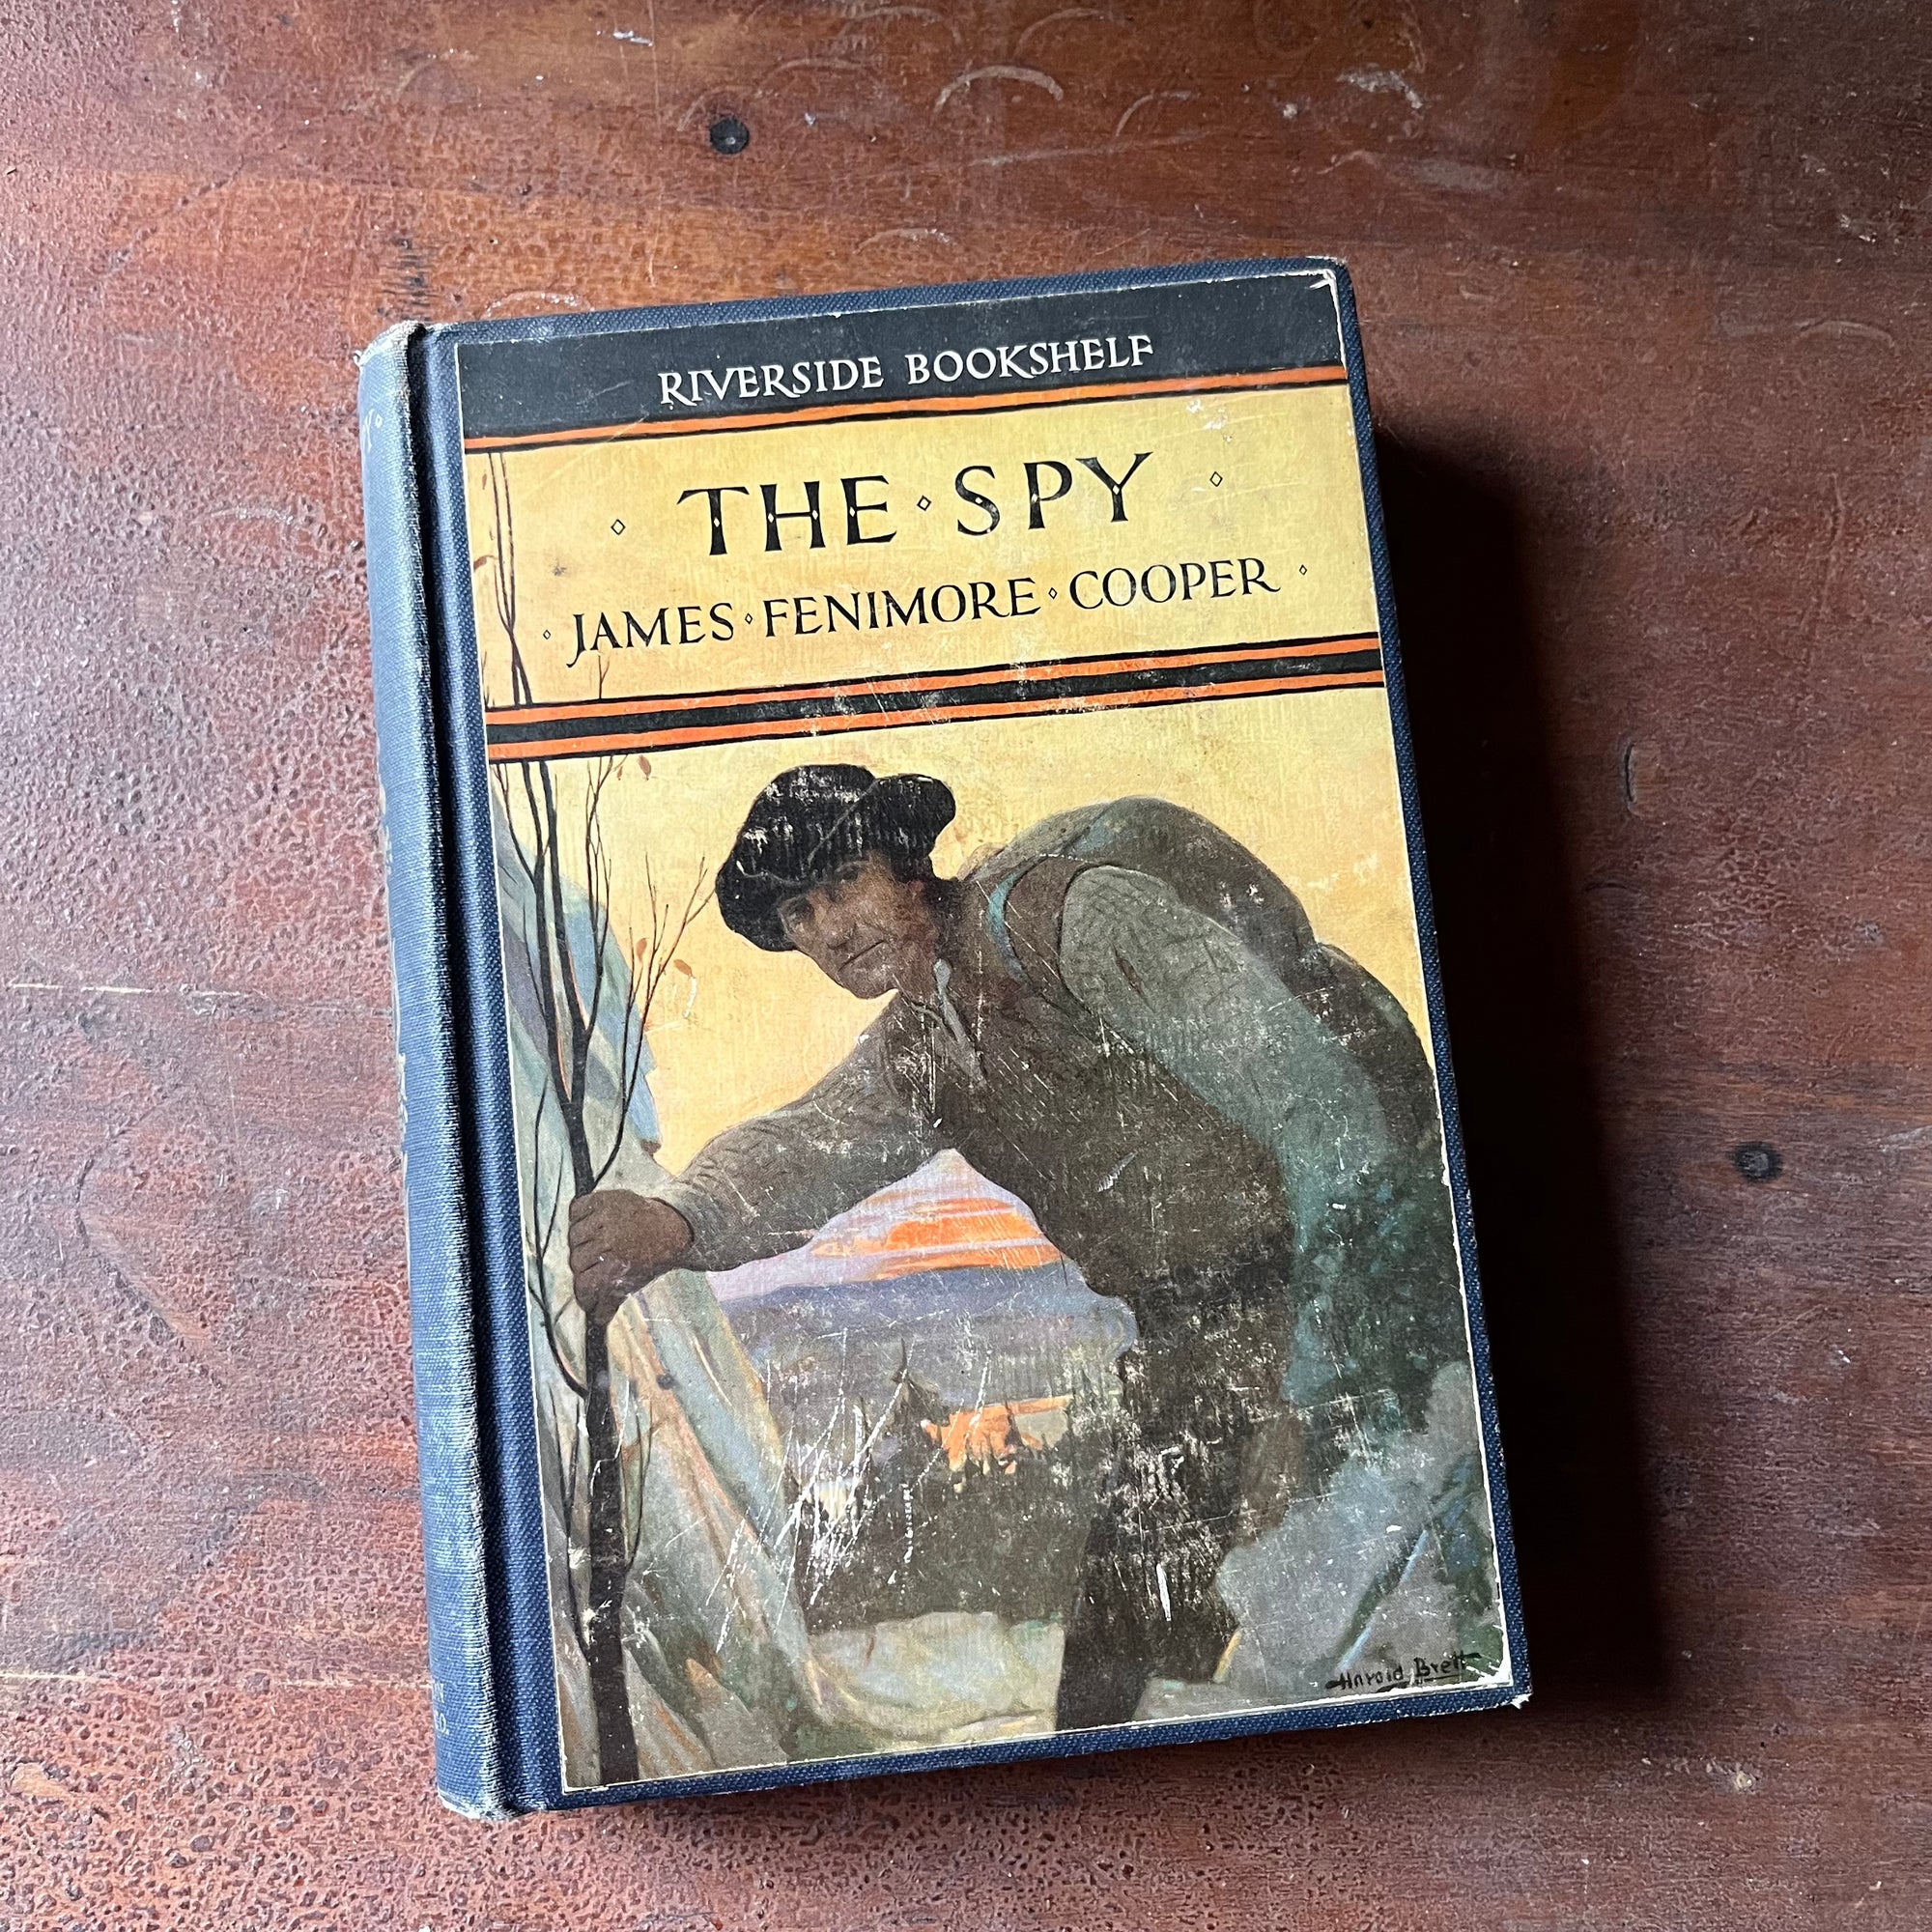 The Spy by James Fenimore Cooper - a 1924 Riverside Bookshelf Edition - view of the front cover